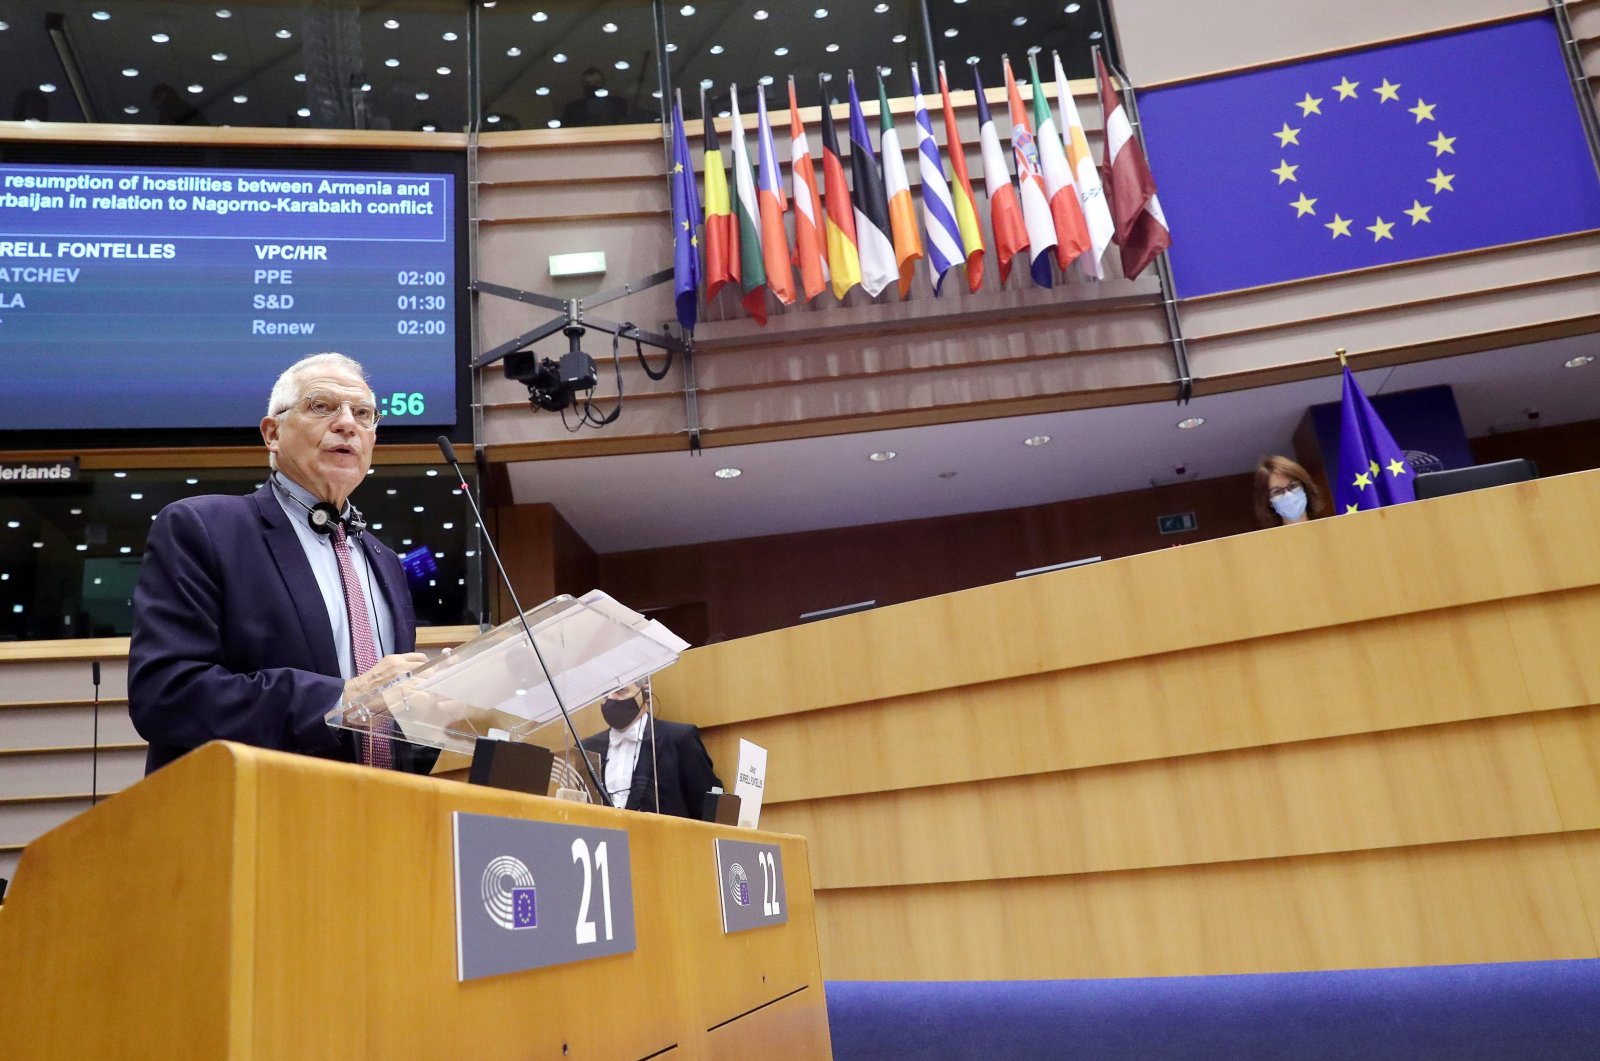 High Representative of the Union for Foreign Affairs and Security Policy Josep Borrell speaks during a plenary session of the European Parliament in Brussels, Belgium, Oct. 7, 2020. (AFP Photo)